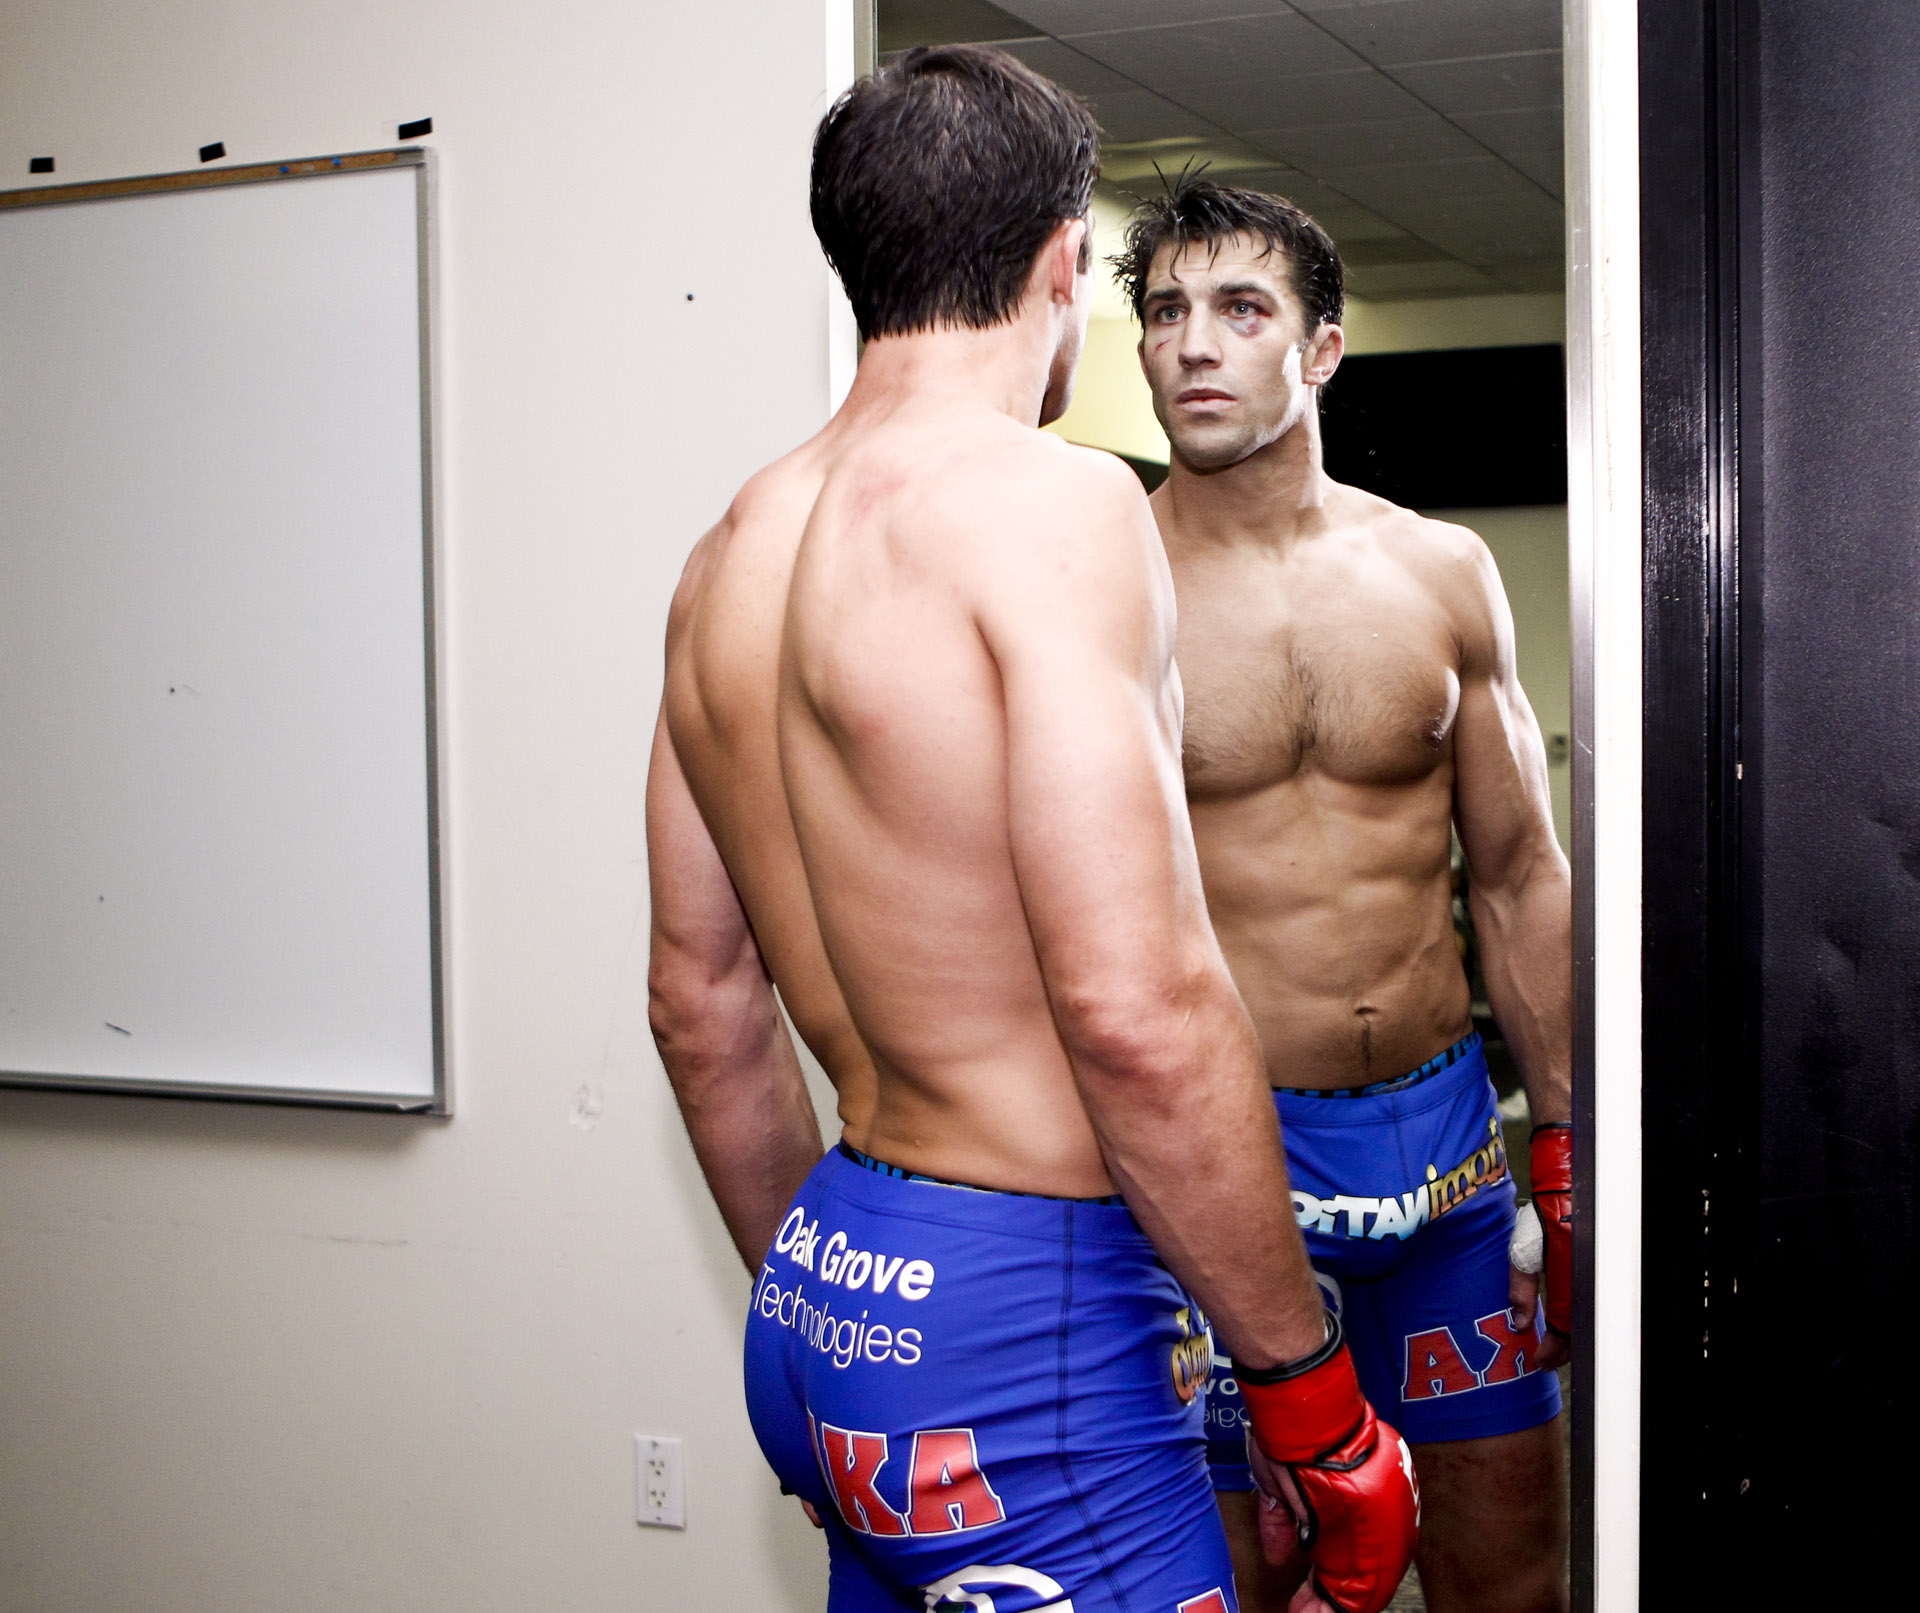 Luke Rockhold was actually a pretty likeable guy once.